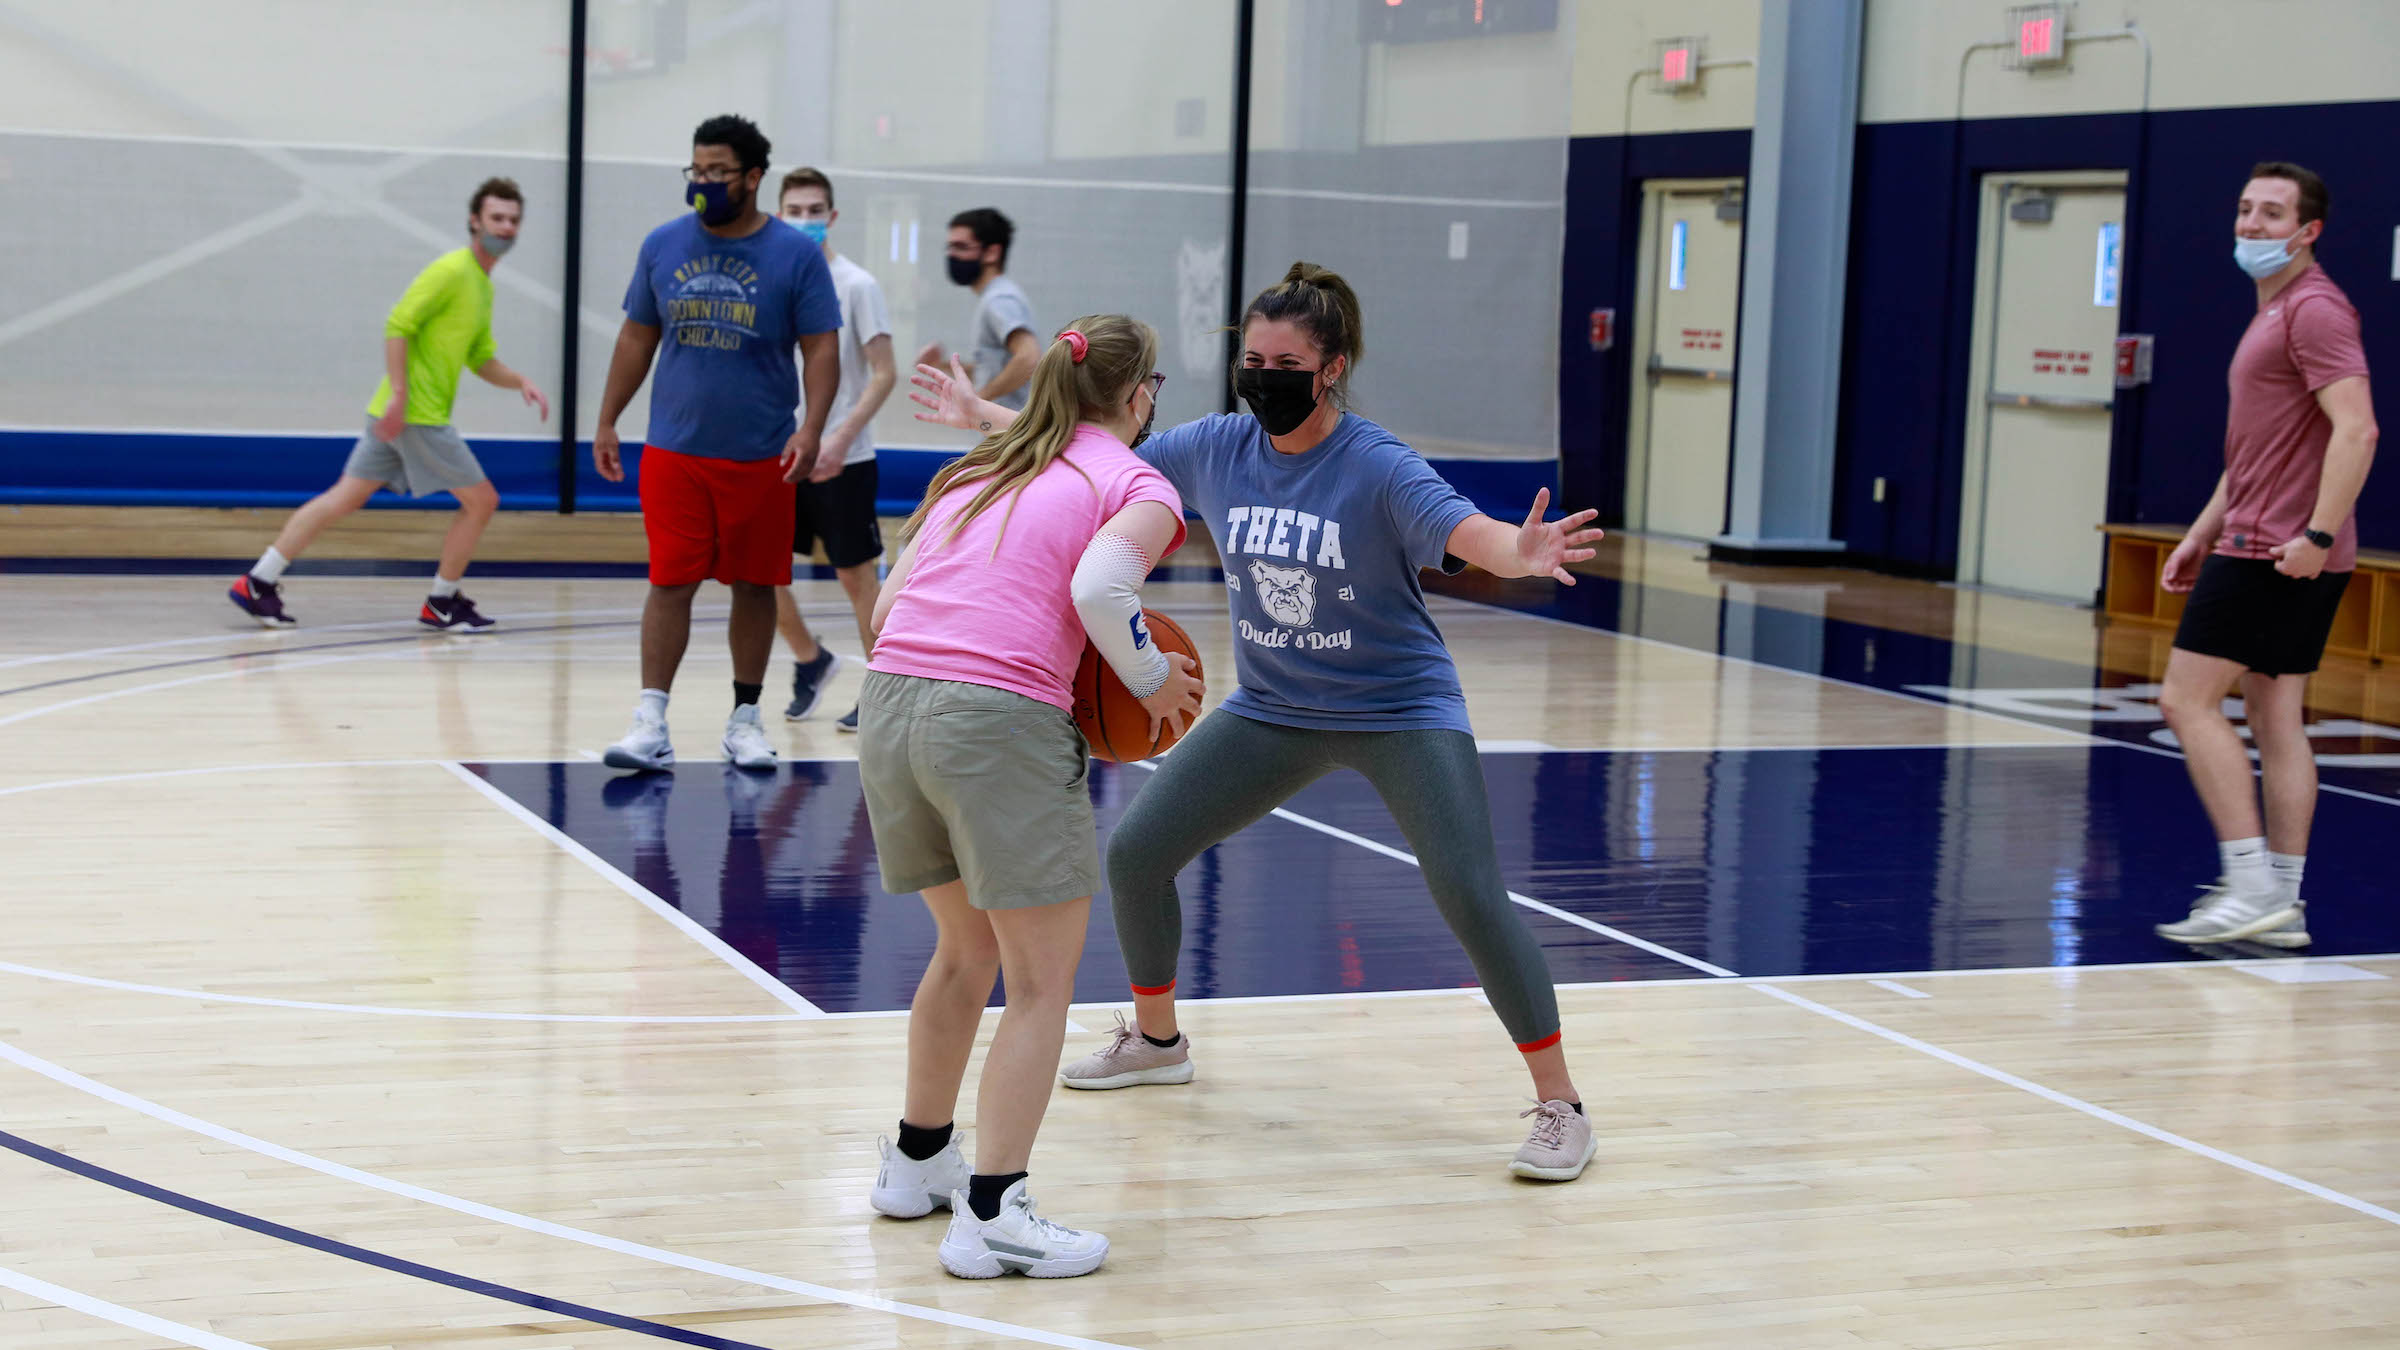 Image from Special Olympics basketball inclusion class article